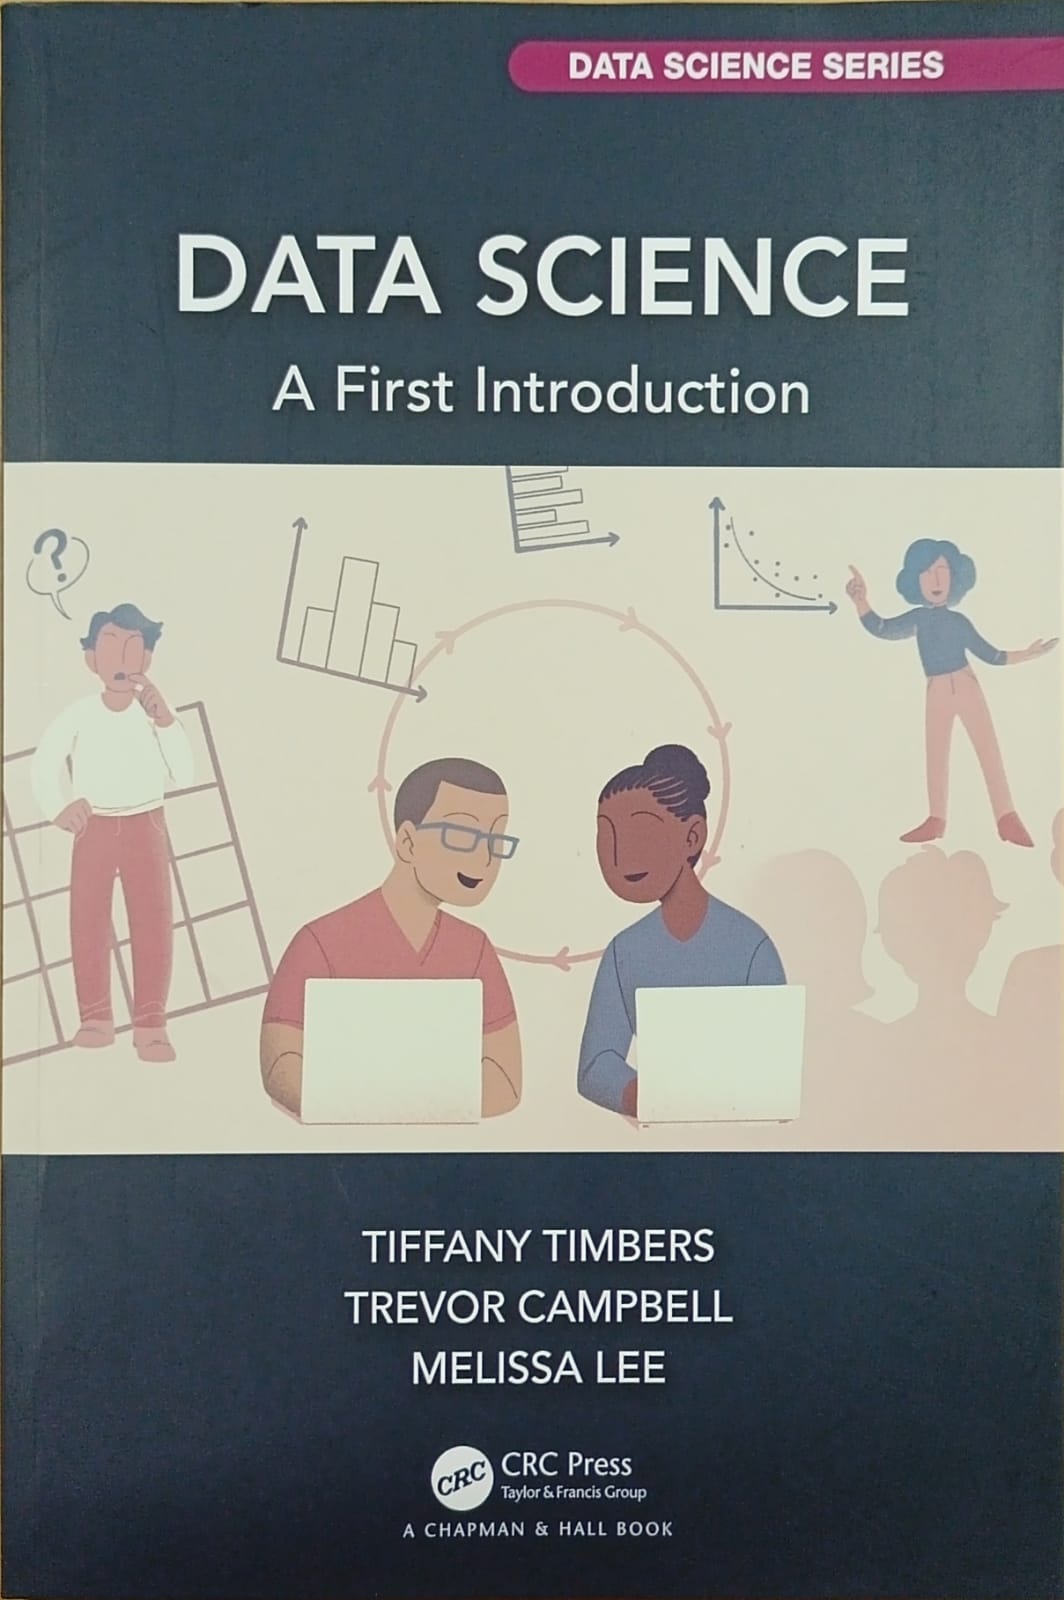 Data science: a first introduction